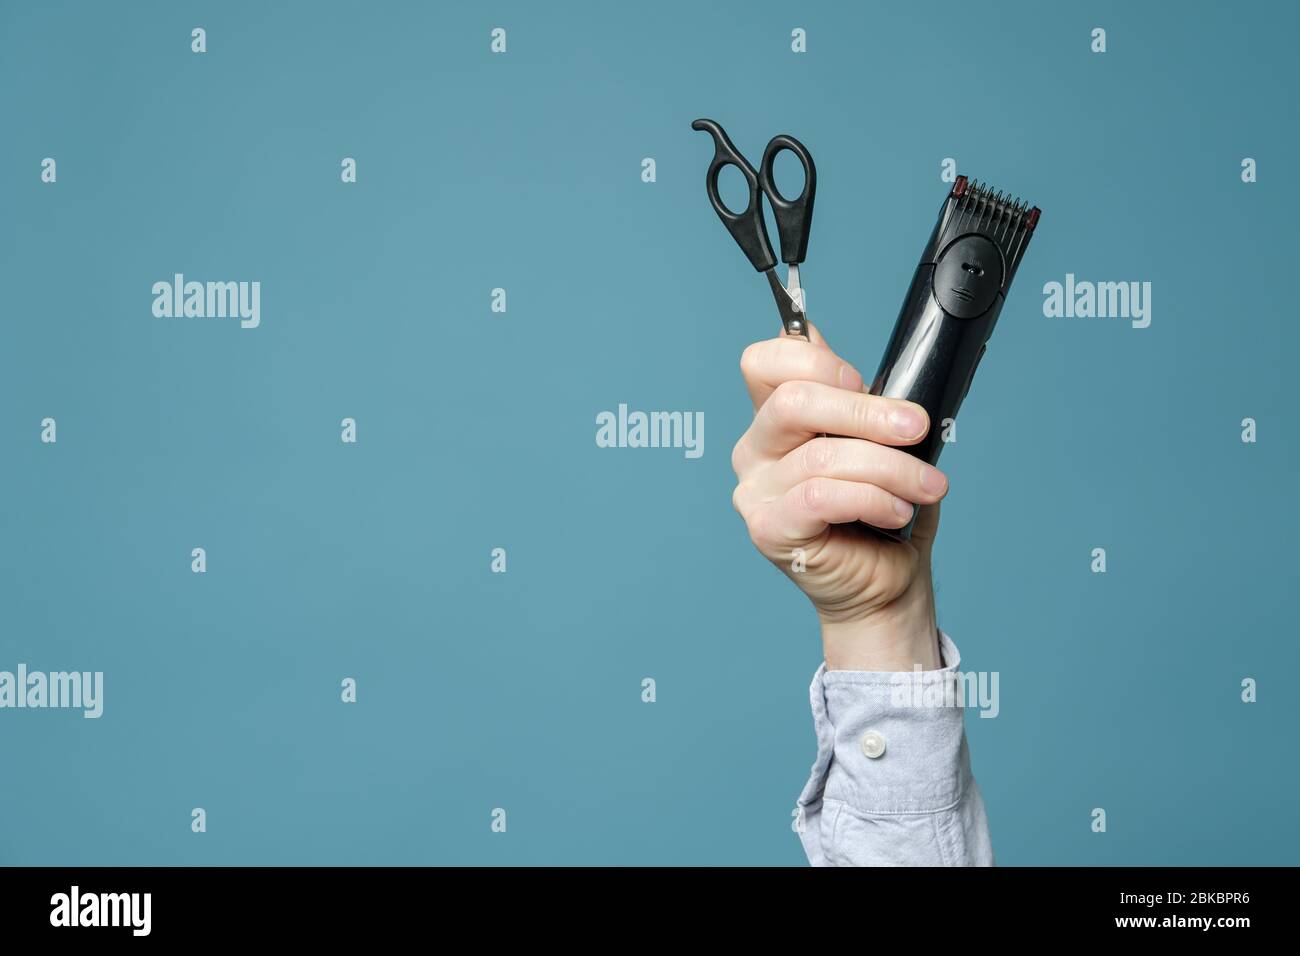 Male hand holds a hairdressing scissors and cordless trimmer. Studio, blue background. Copy space. Stock Photo